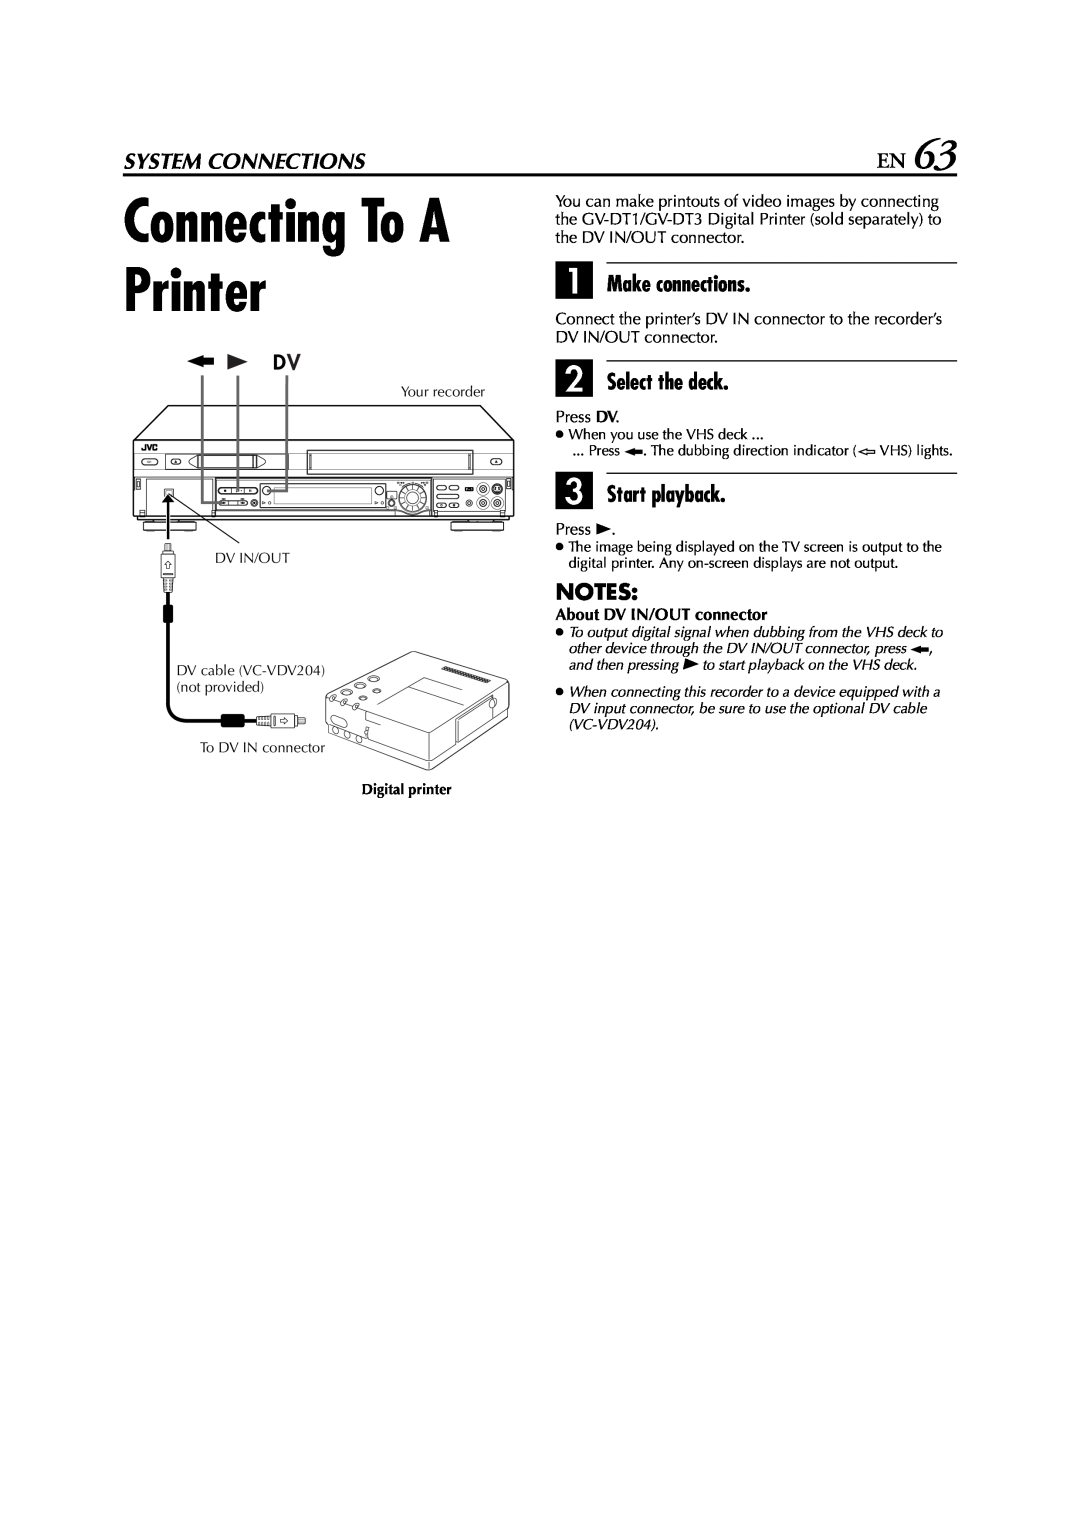 JVC LPT0616-001A System Connections, B Select the deck, C Start playback, Connecting To A Printer, A Make connections 